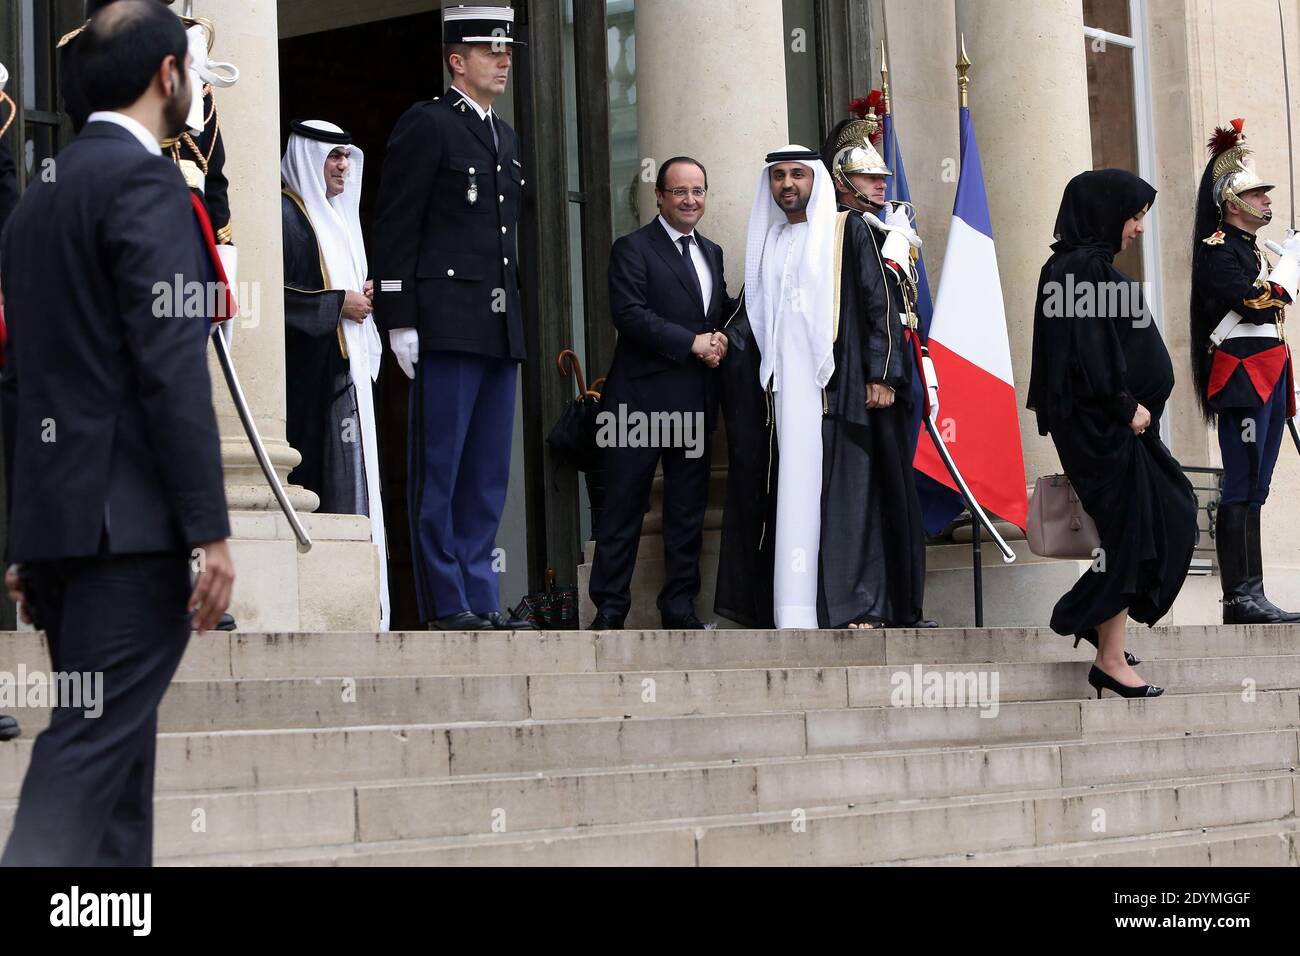 French President Francois Hollande shakes hands with the delegation of Dubai ruler Sheikh Mohammed bin Rashid al-Maktoum after a meeting at the Elysee Palace, in Paris, France on June 13, 2013. Photo by Stephane Lemouton/ABACAPRESS.COM Stock Photo